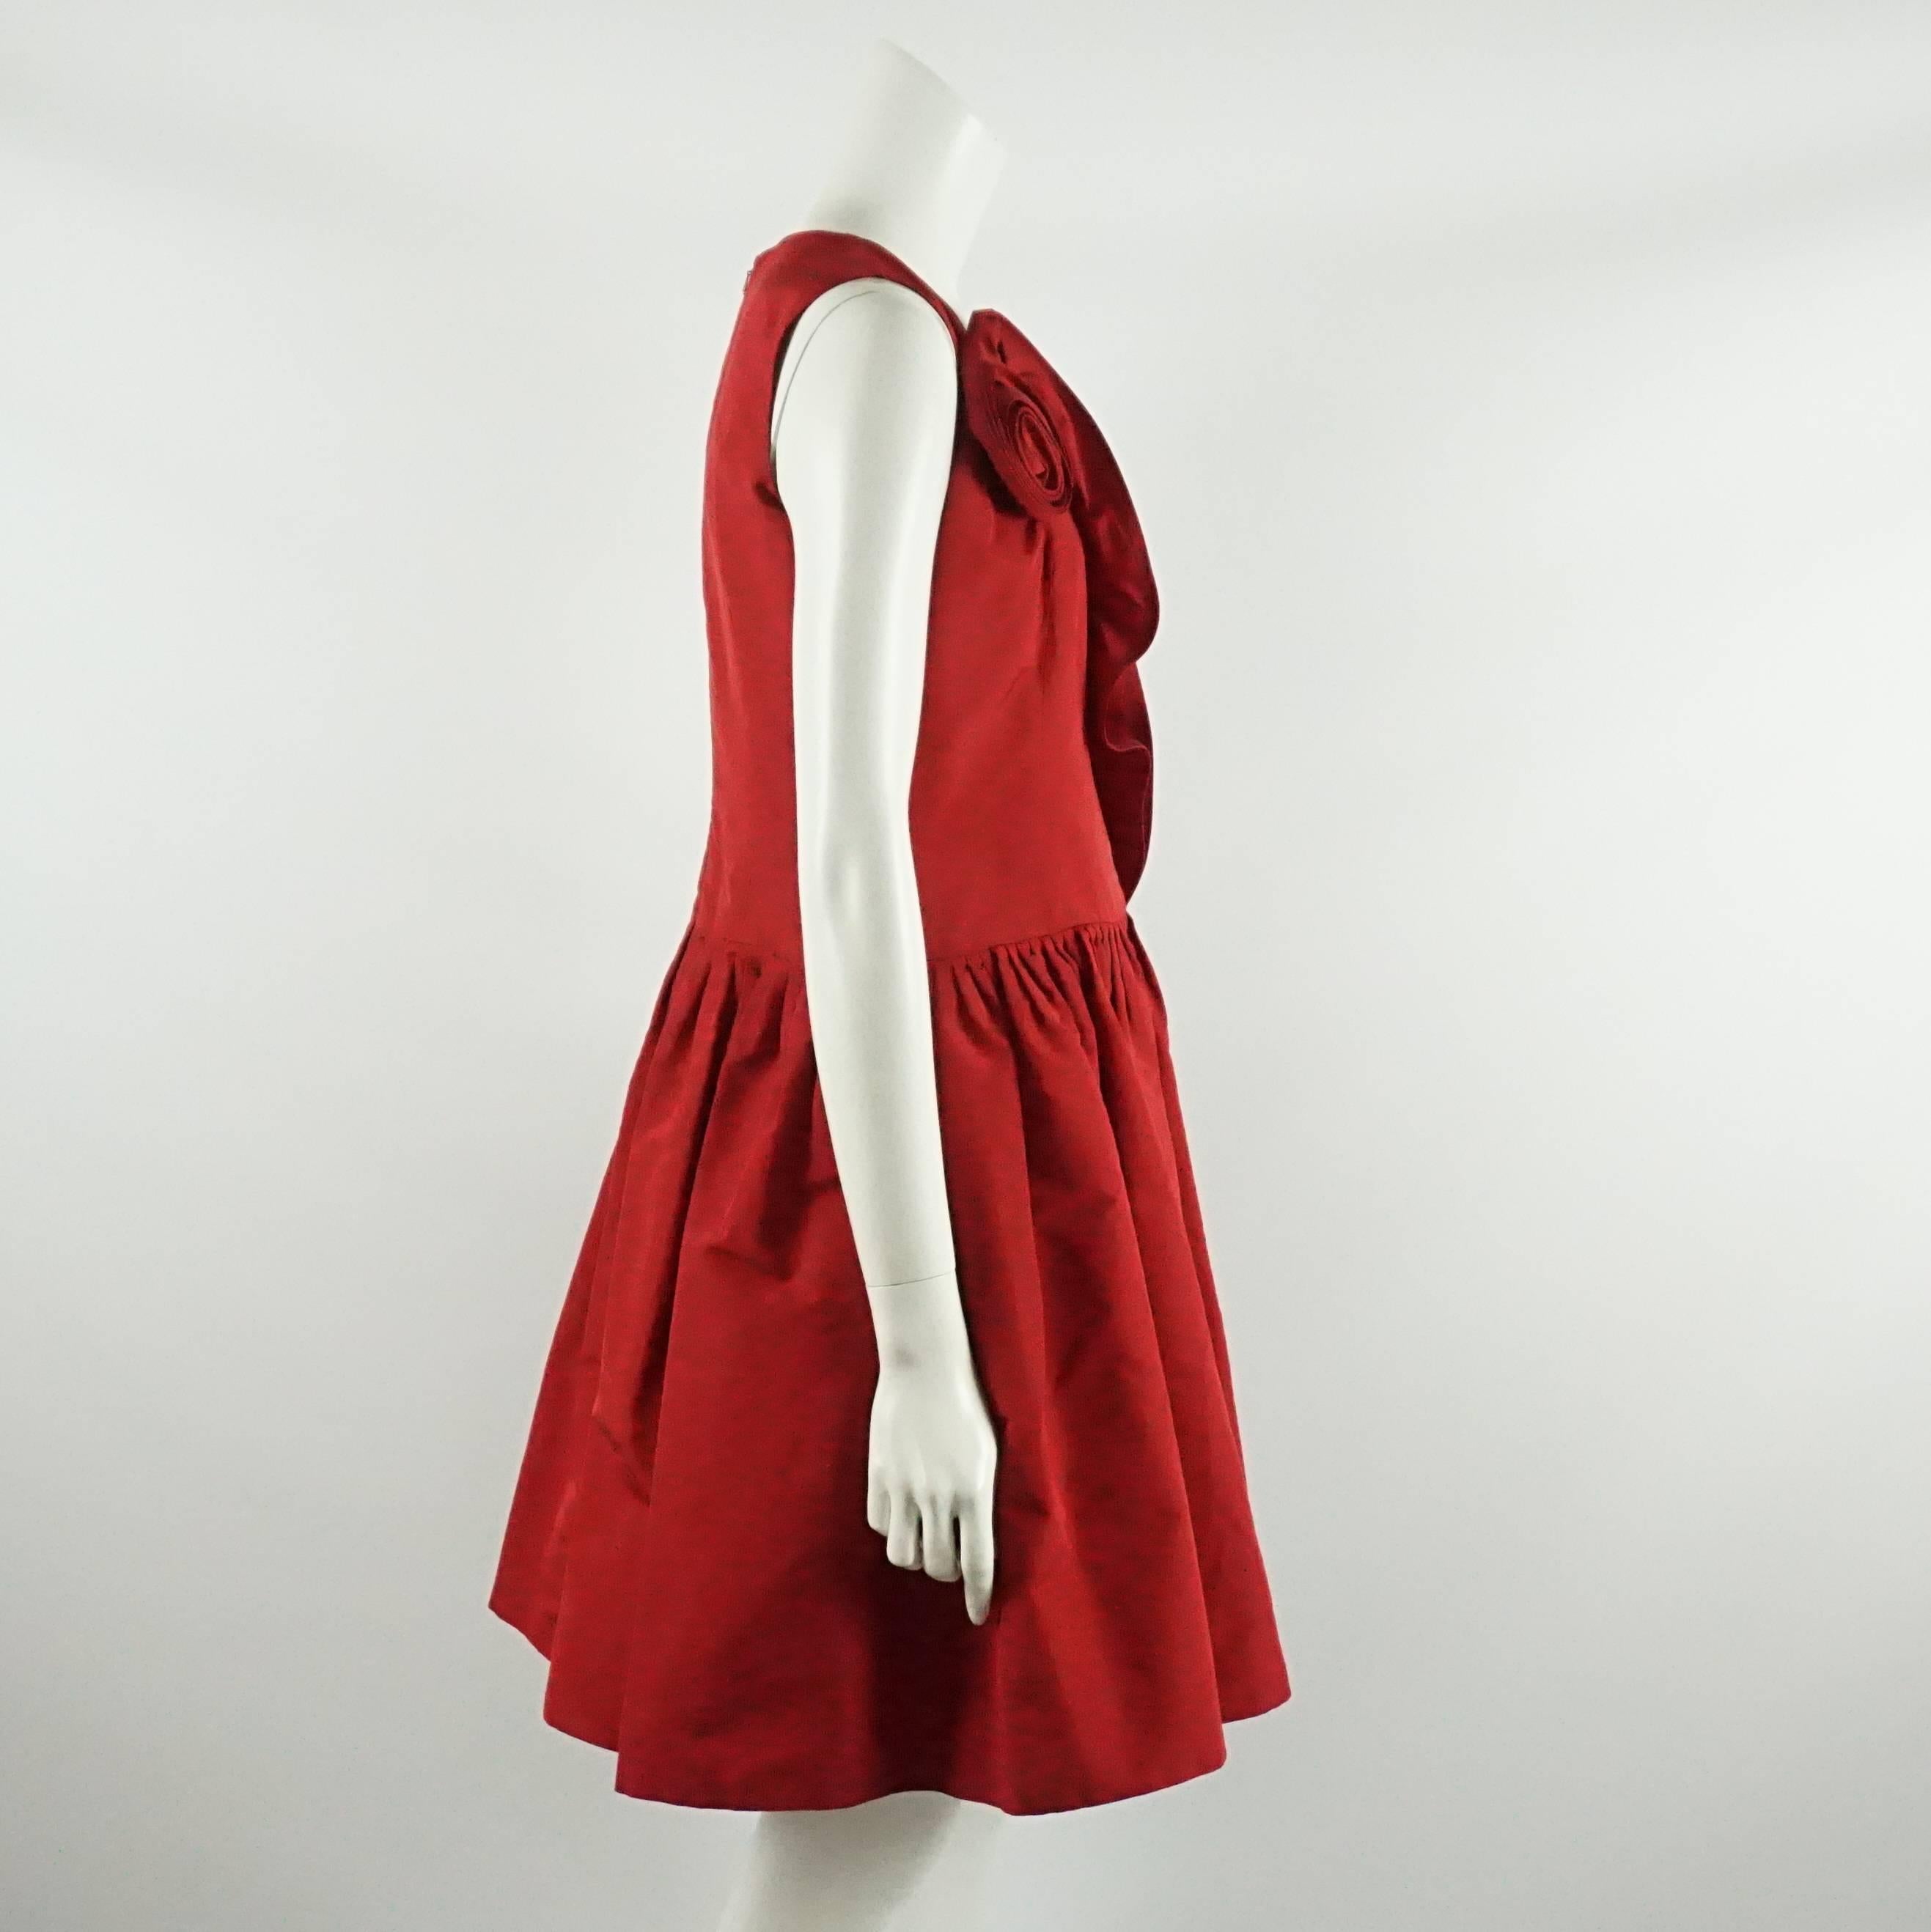 This Oscar de la Renta red silk taffeta dress is sleeveless with a drop waist and pleating at the beginning of the skirt. This dress also has a ruffle that leads into a rose along the bodice and going up to the bust. This dress is in excellent